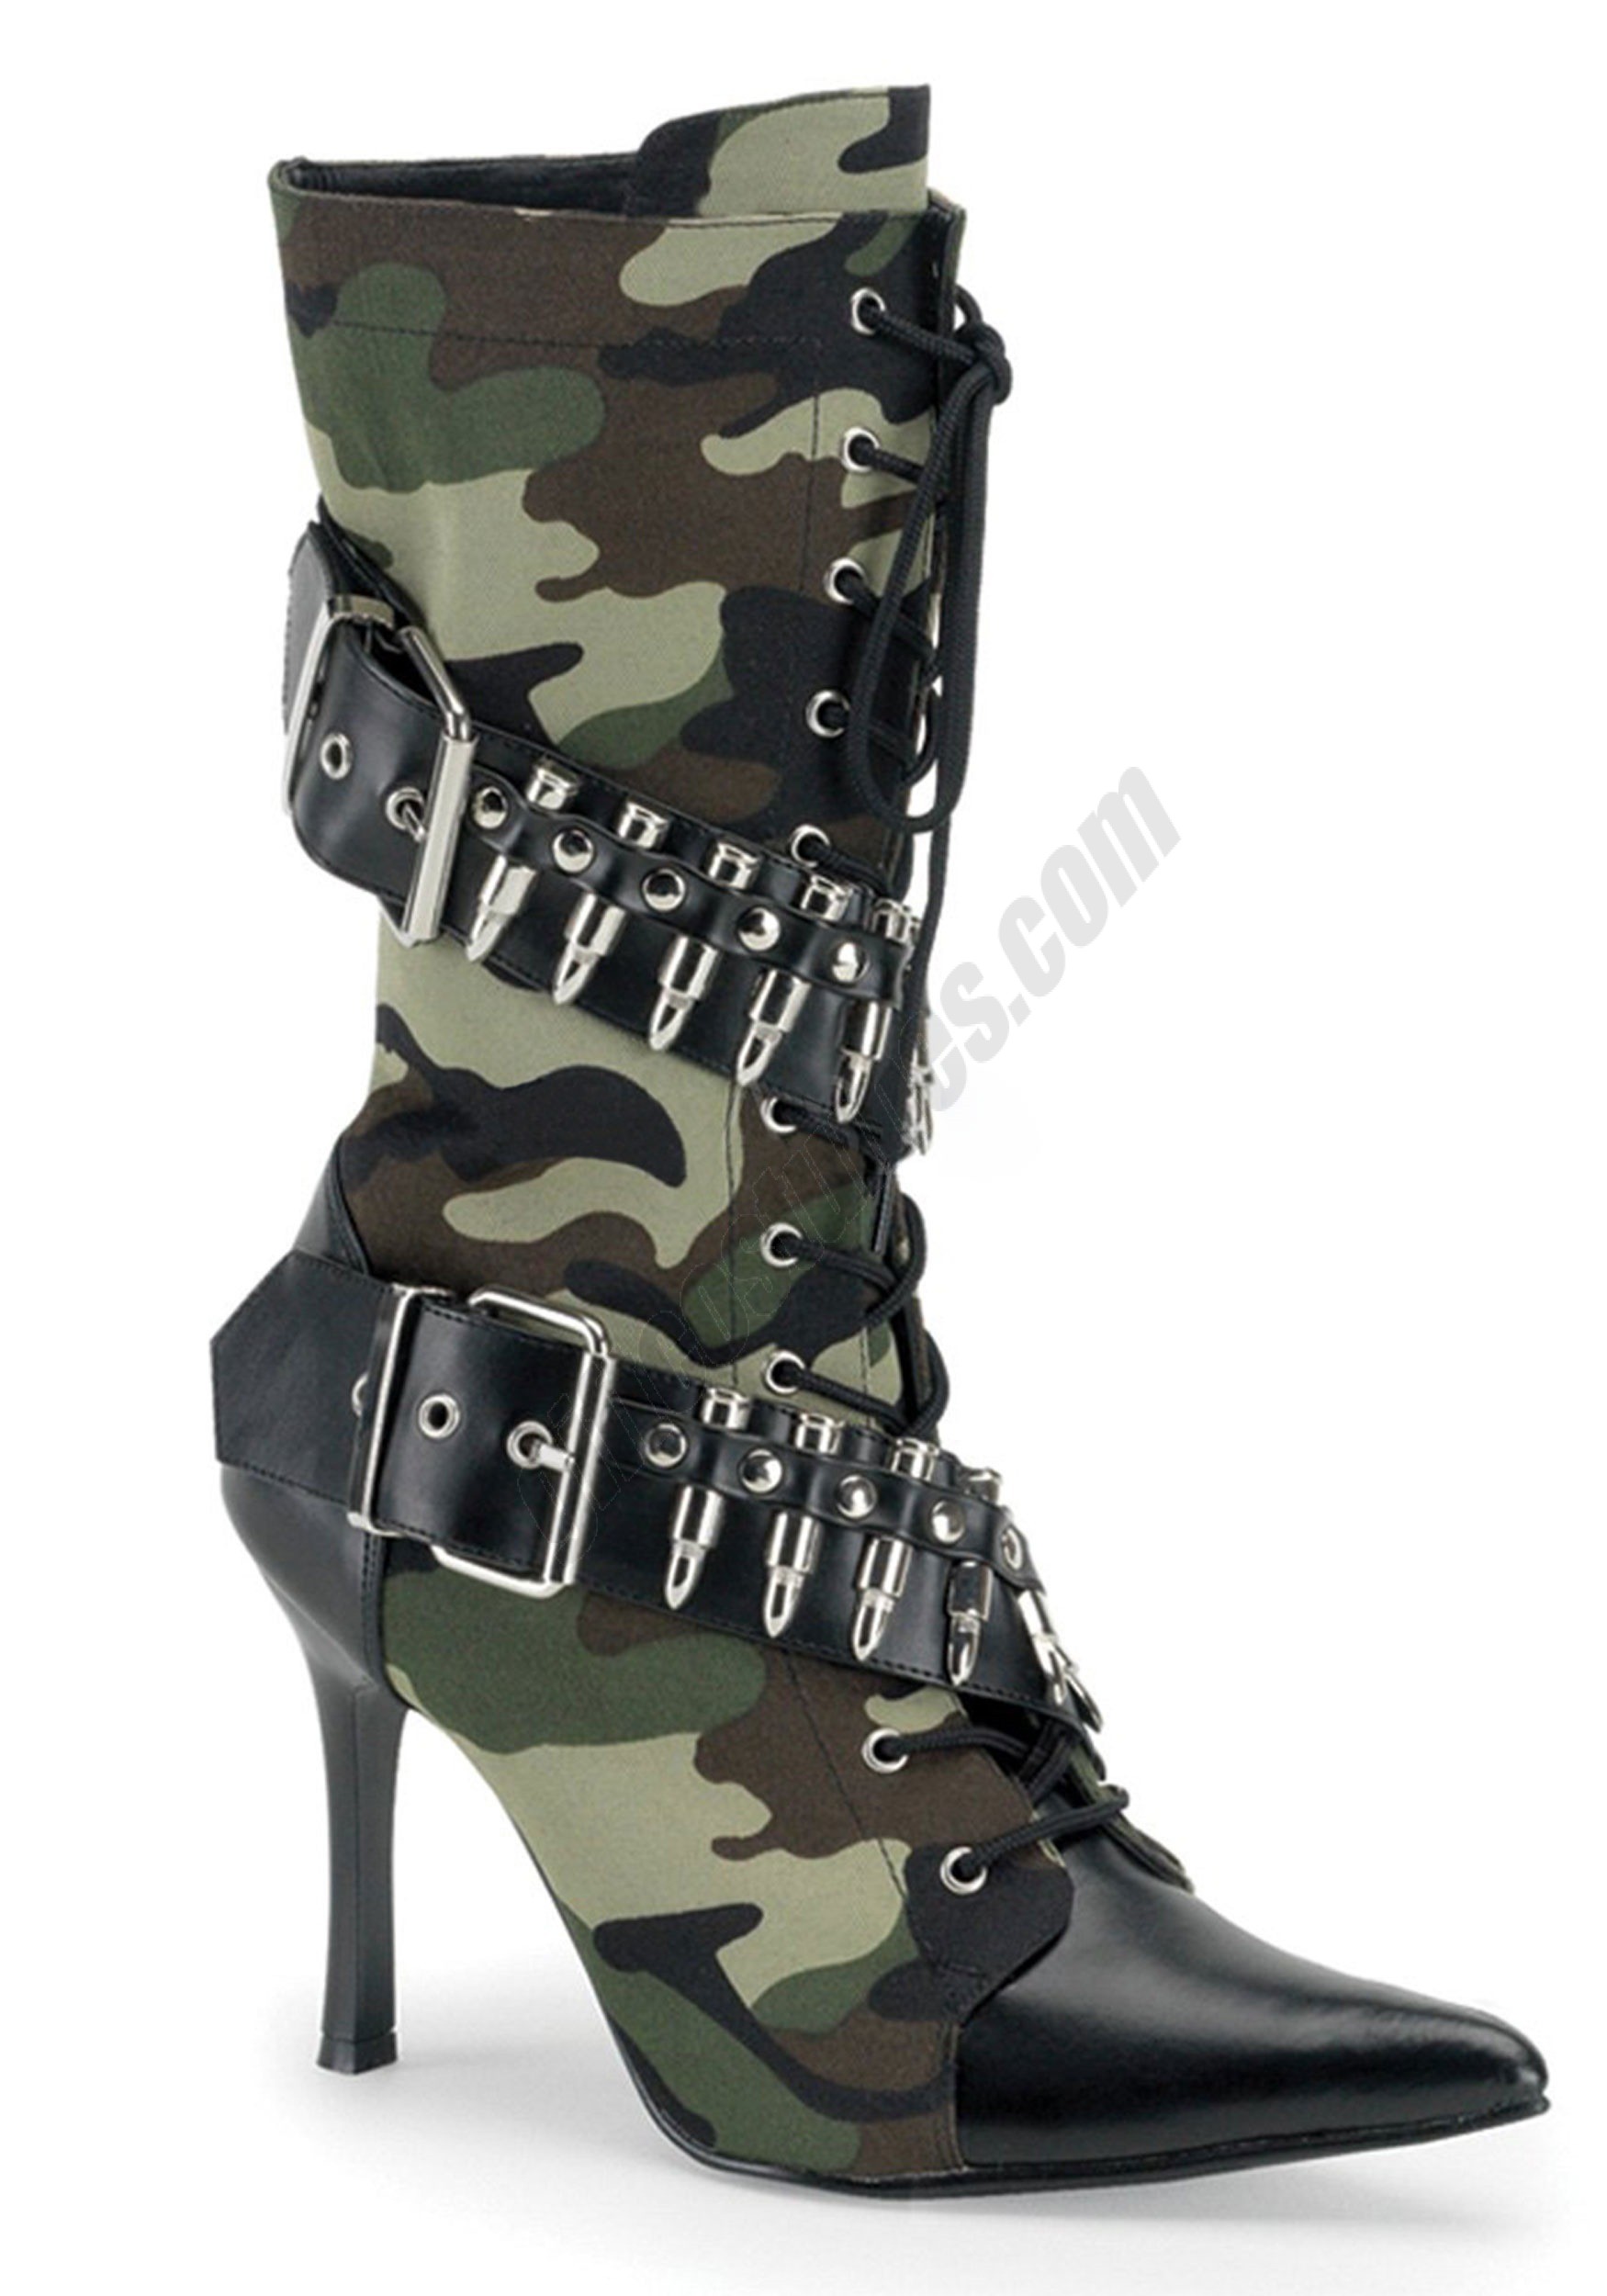 Army Boots for Women Promotions - Army Boots for Women Promotions